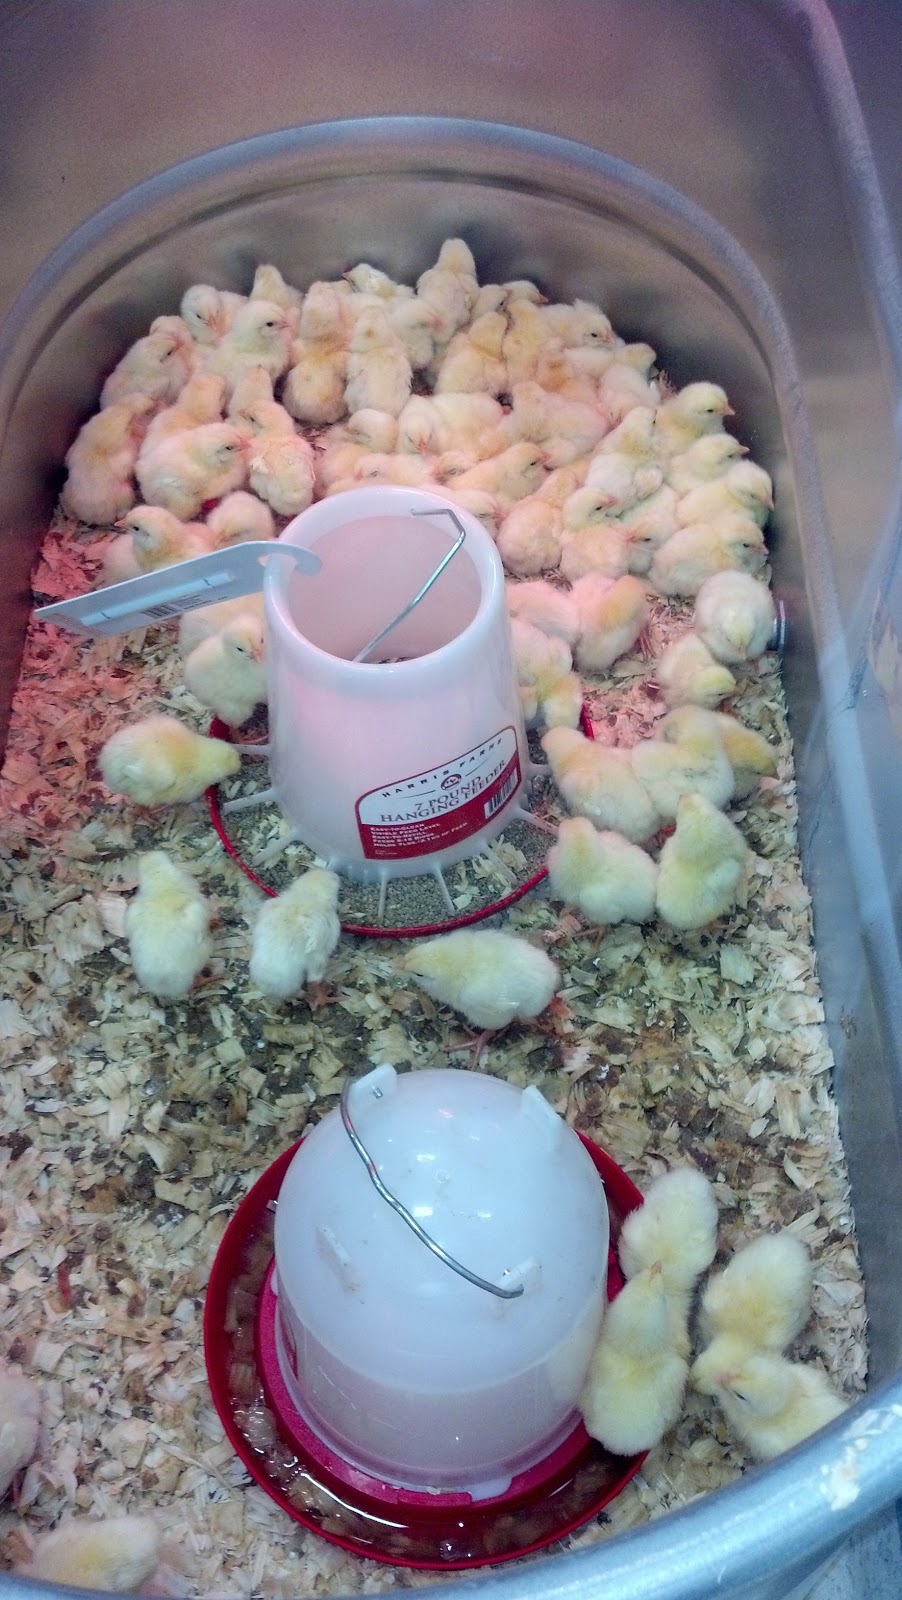 Tractor Supply "Chick Days!" Happy Days Farm